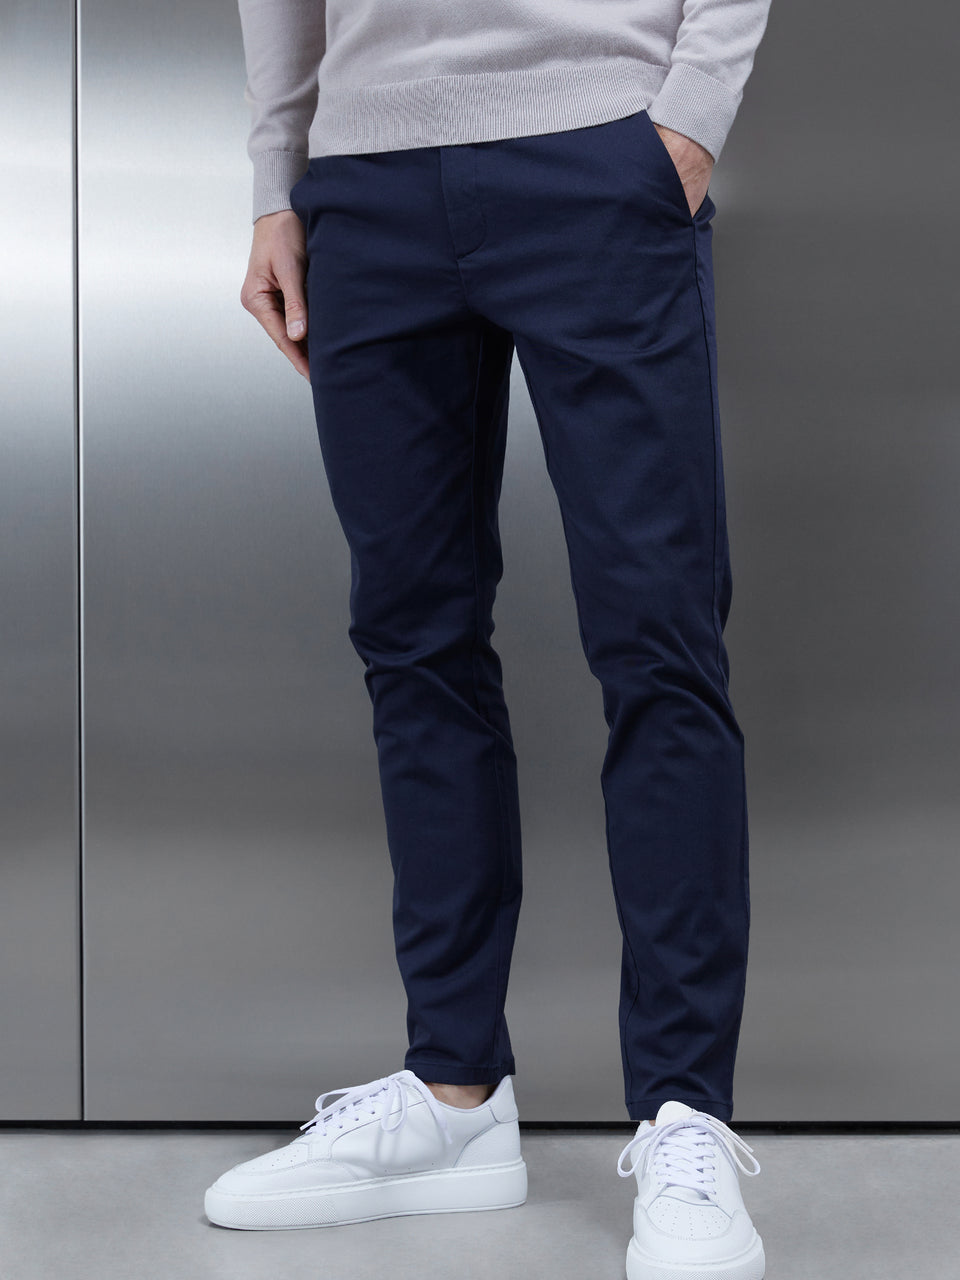 Tailored Chino Trouser in Navy